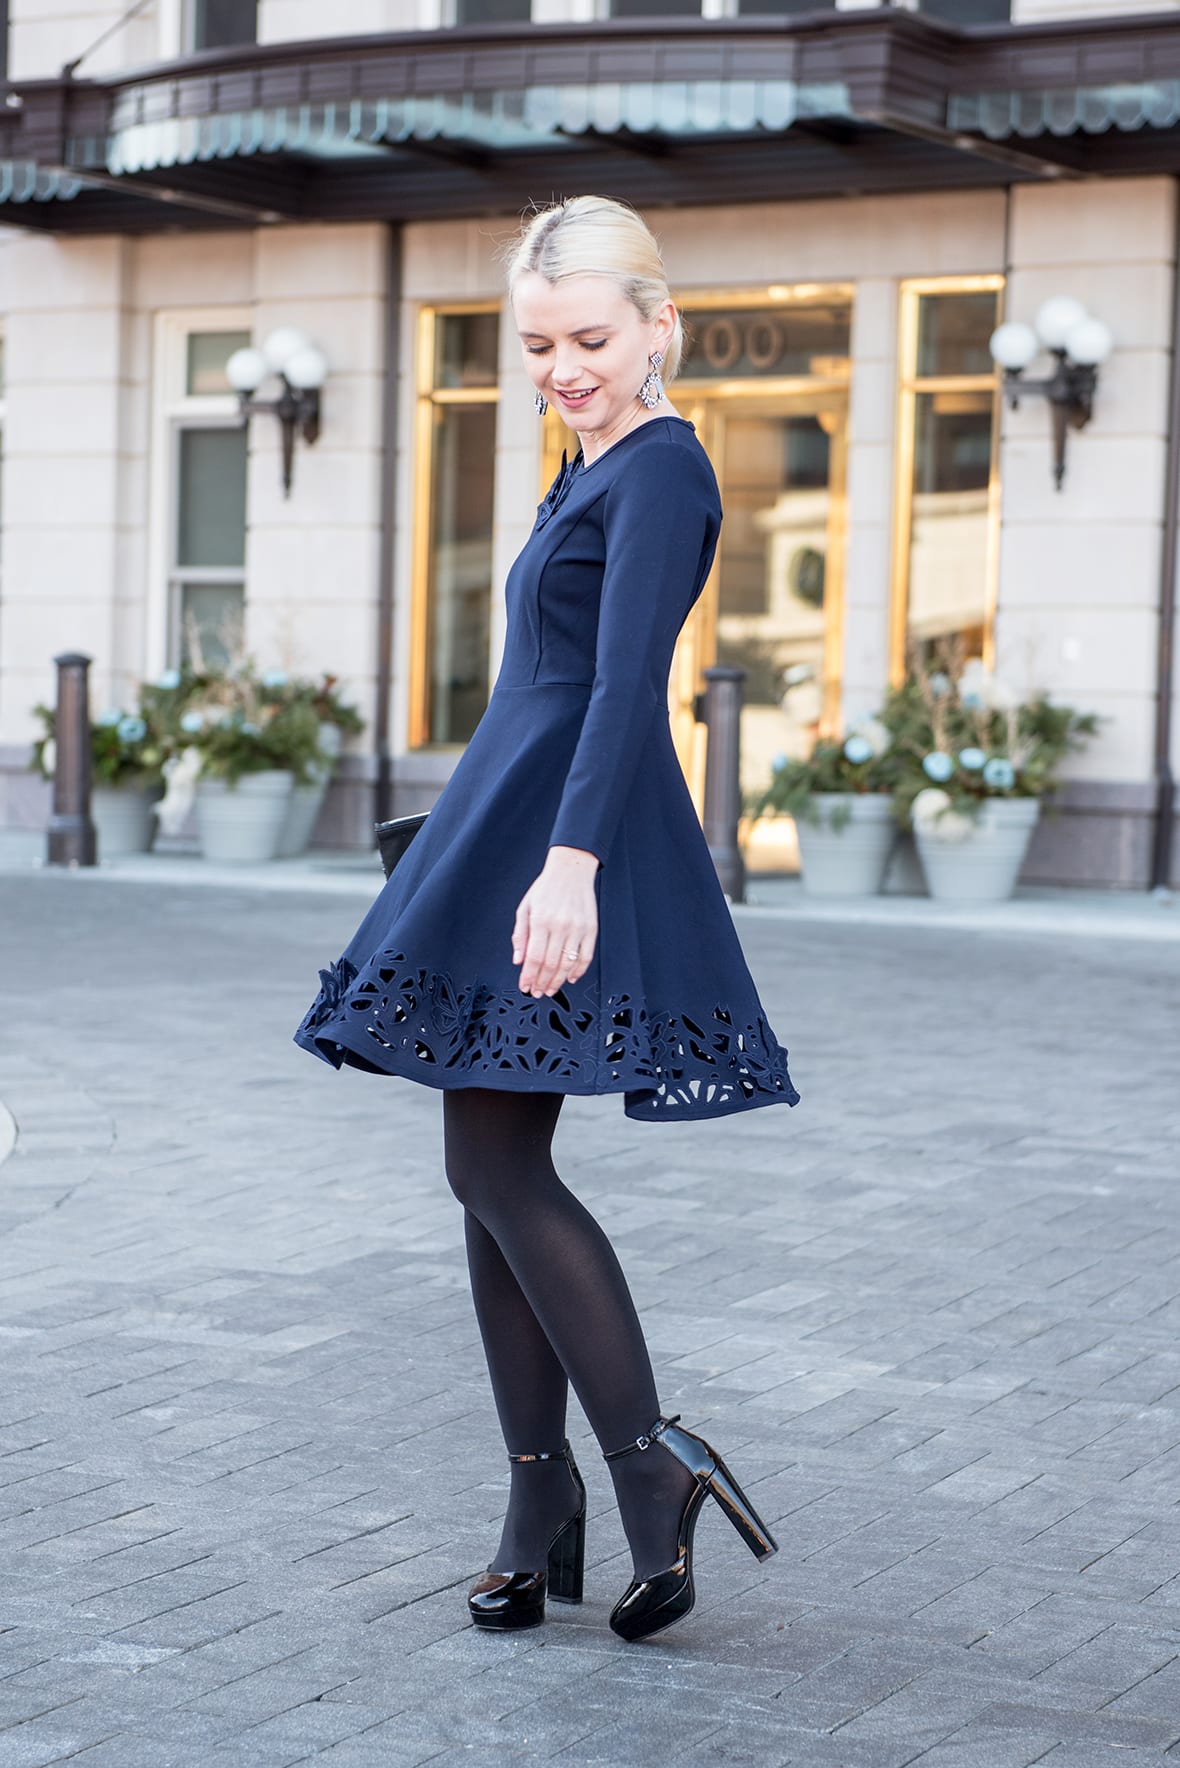 What color tights to wear with a navy dress?